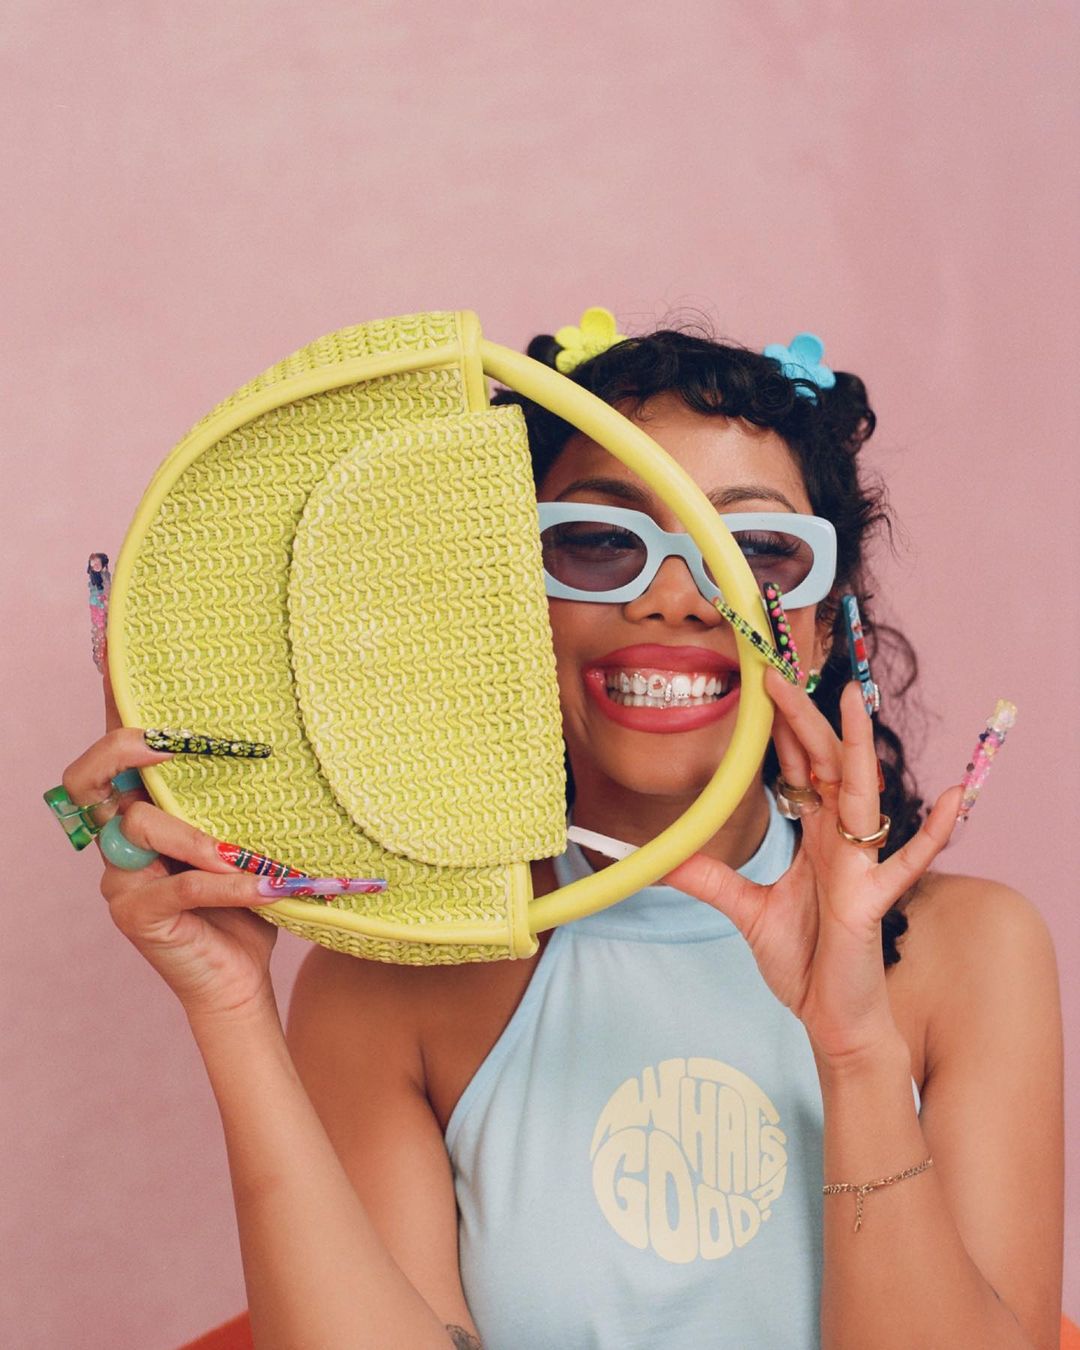 Instagram Influencer Wuzg00d Debuts Collection With Target